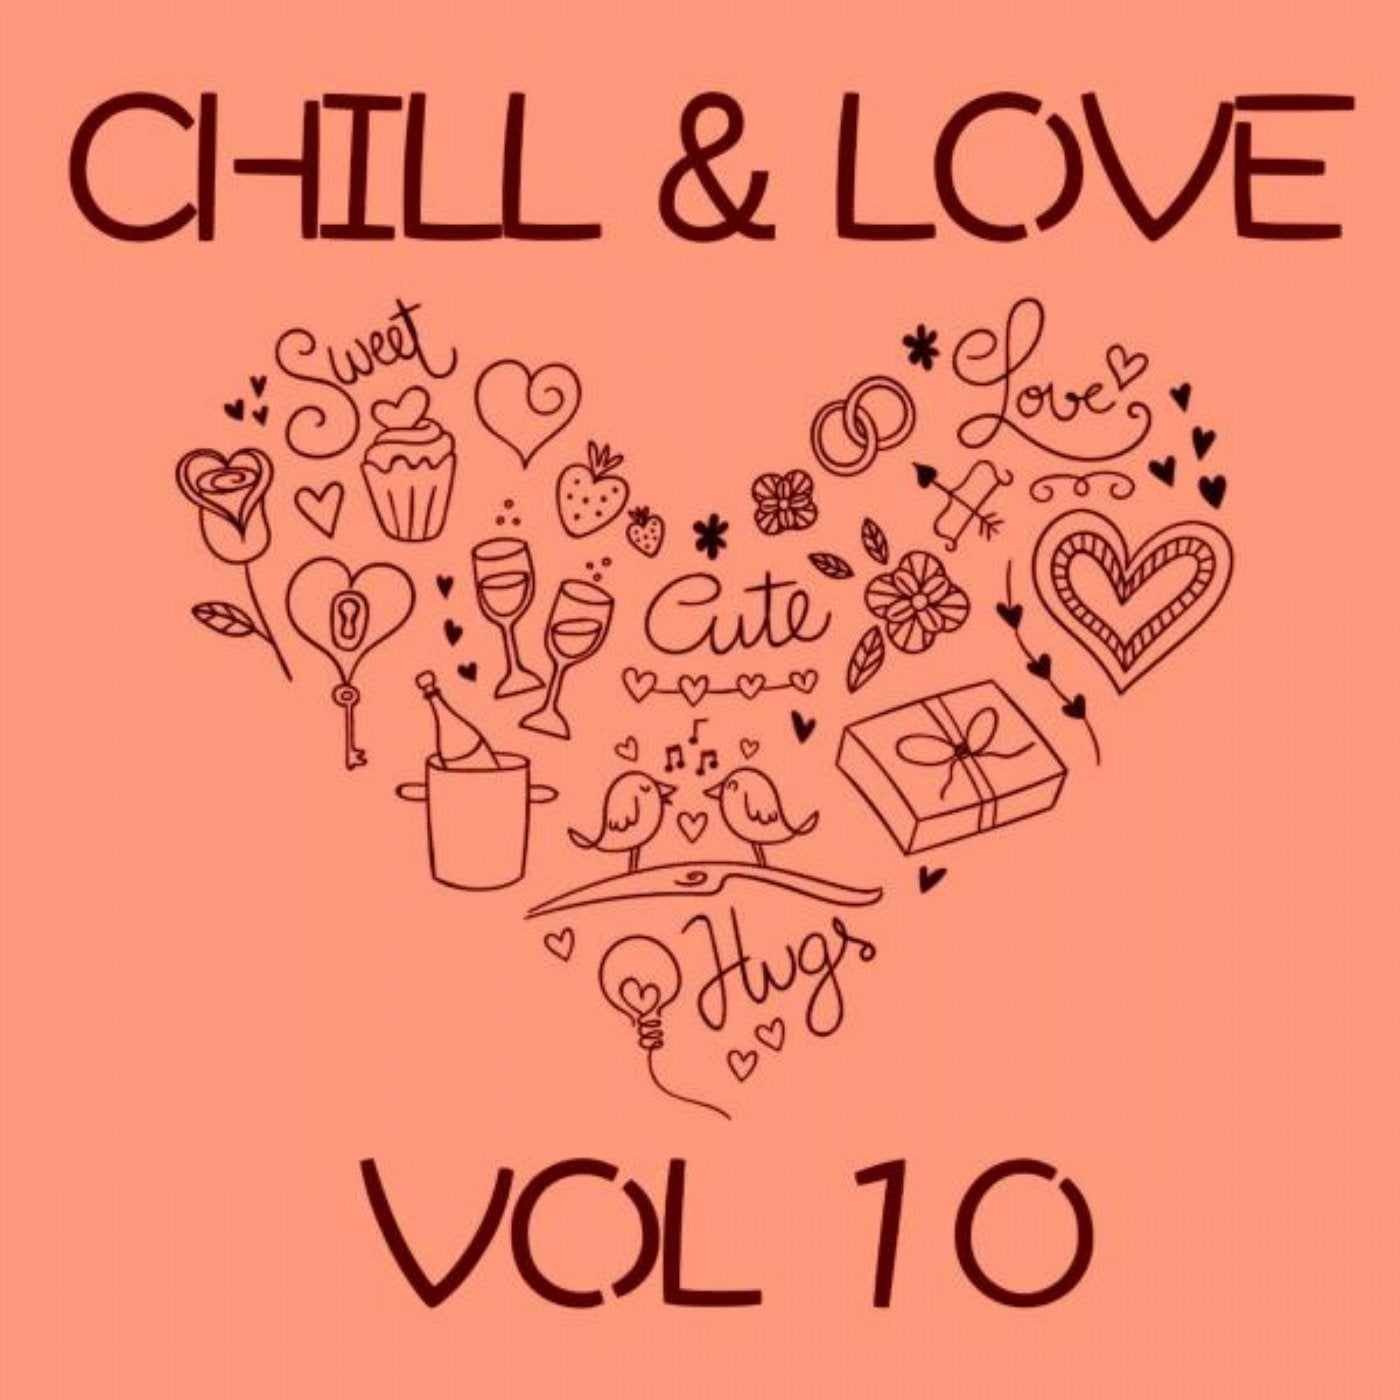 Chilled love. Chill Love.